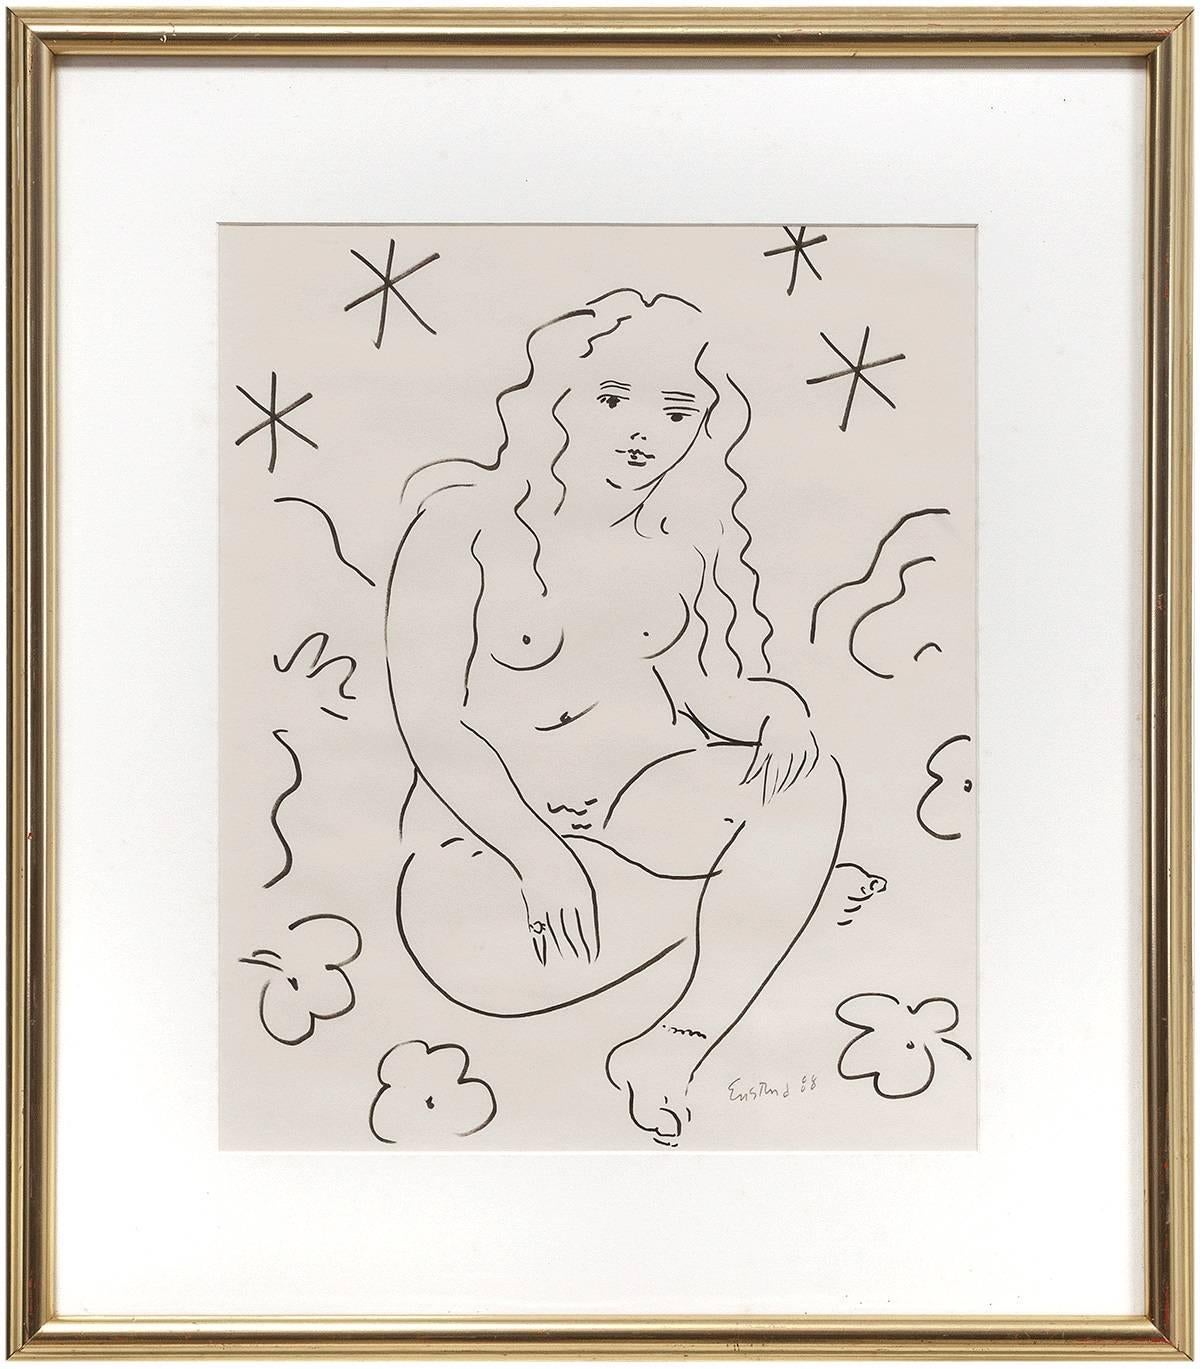 Sitting Nude, Drawing in Ink